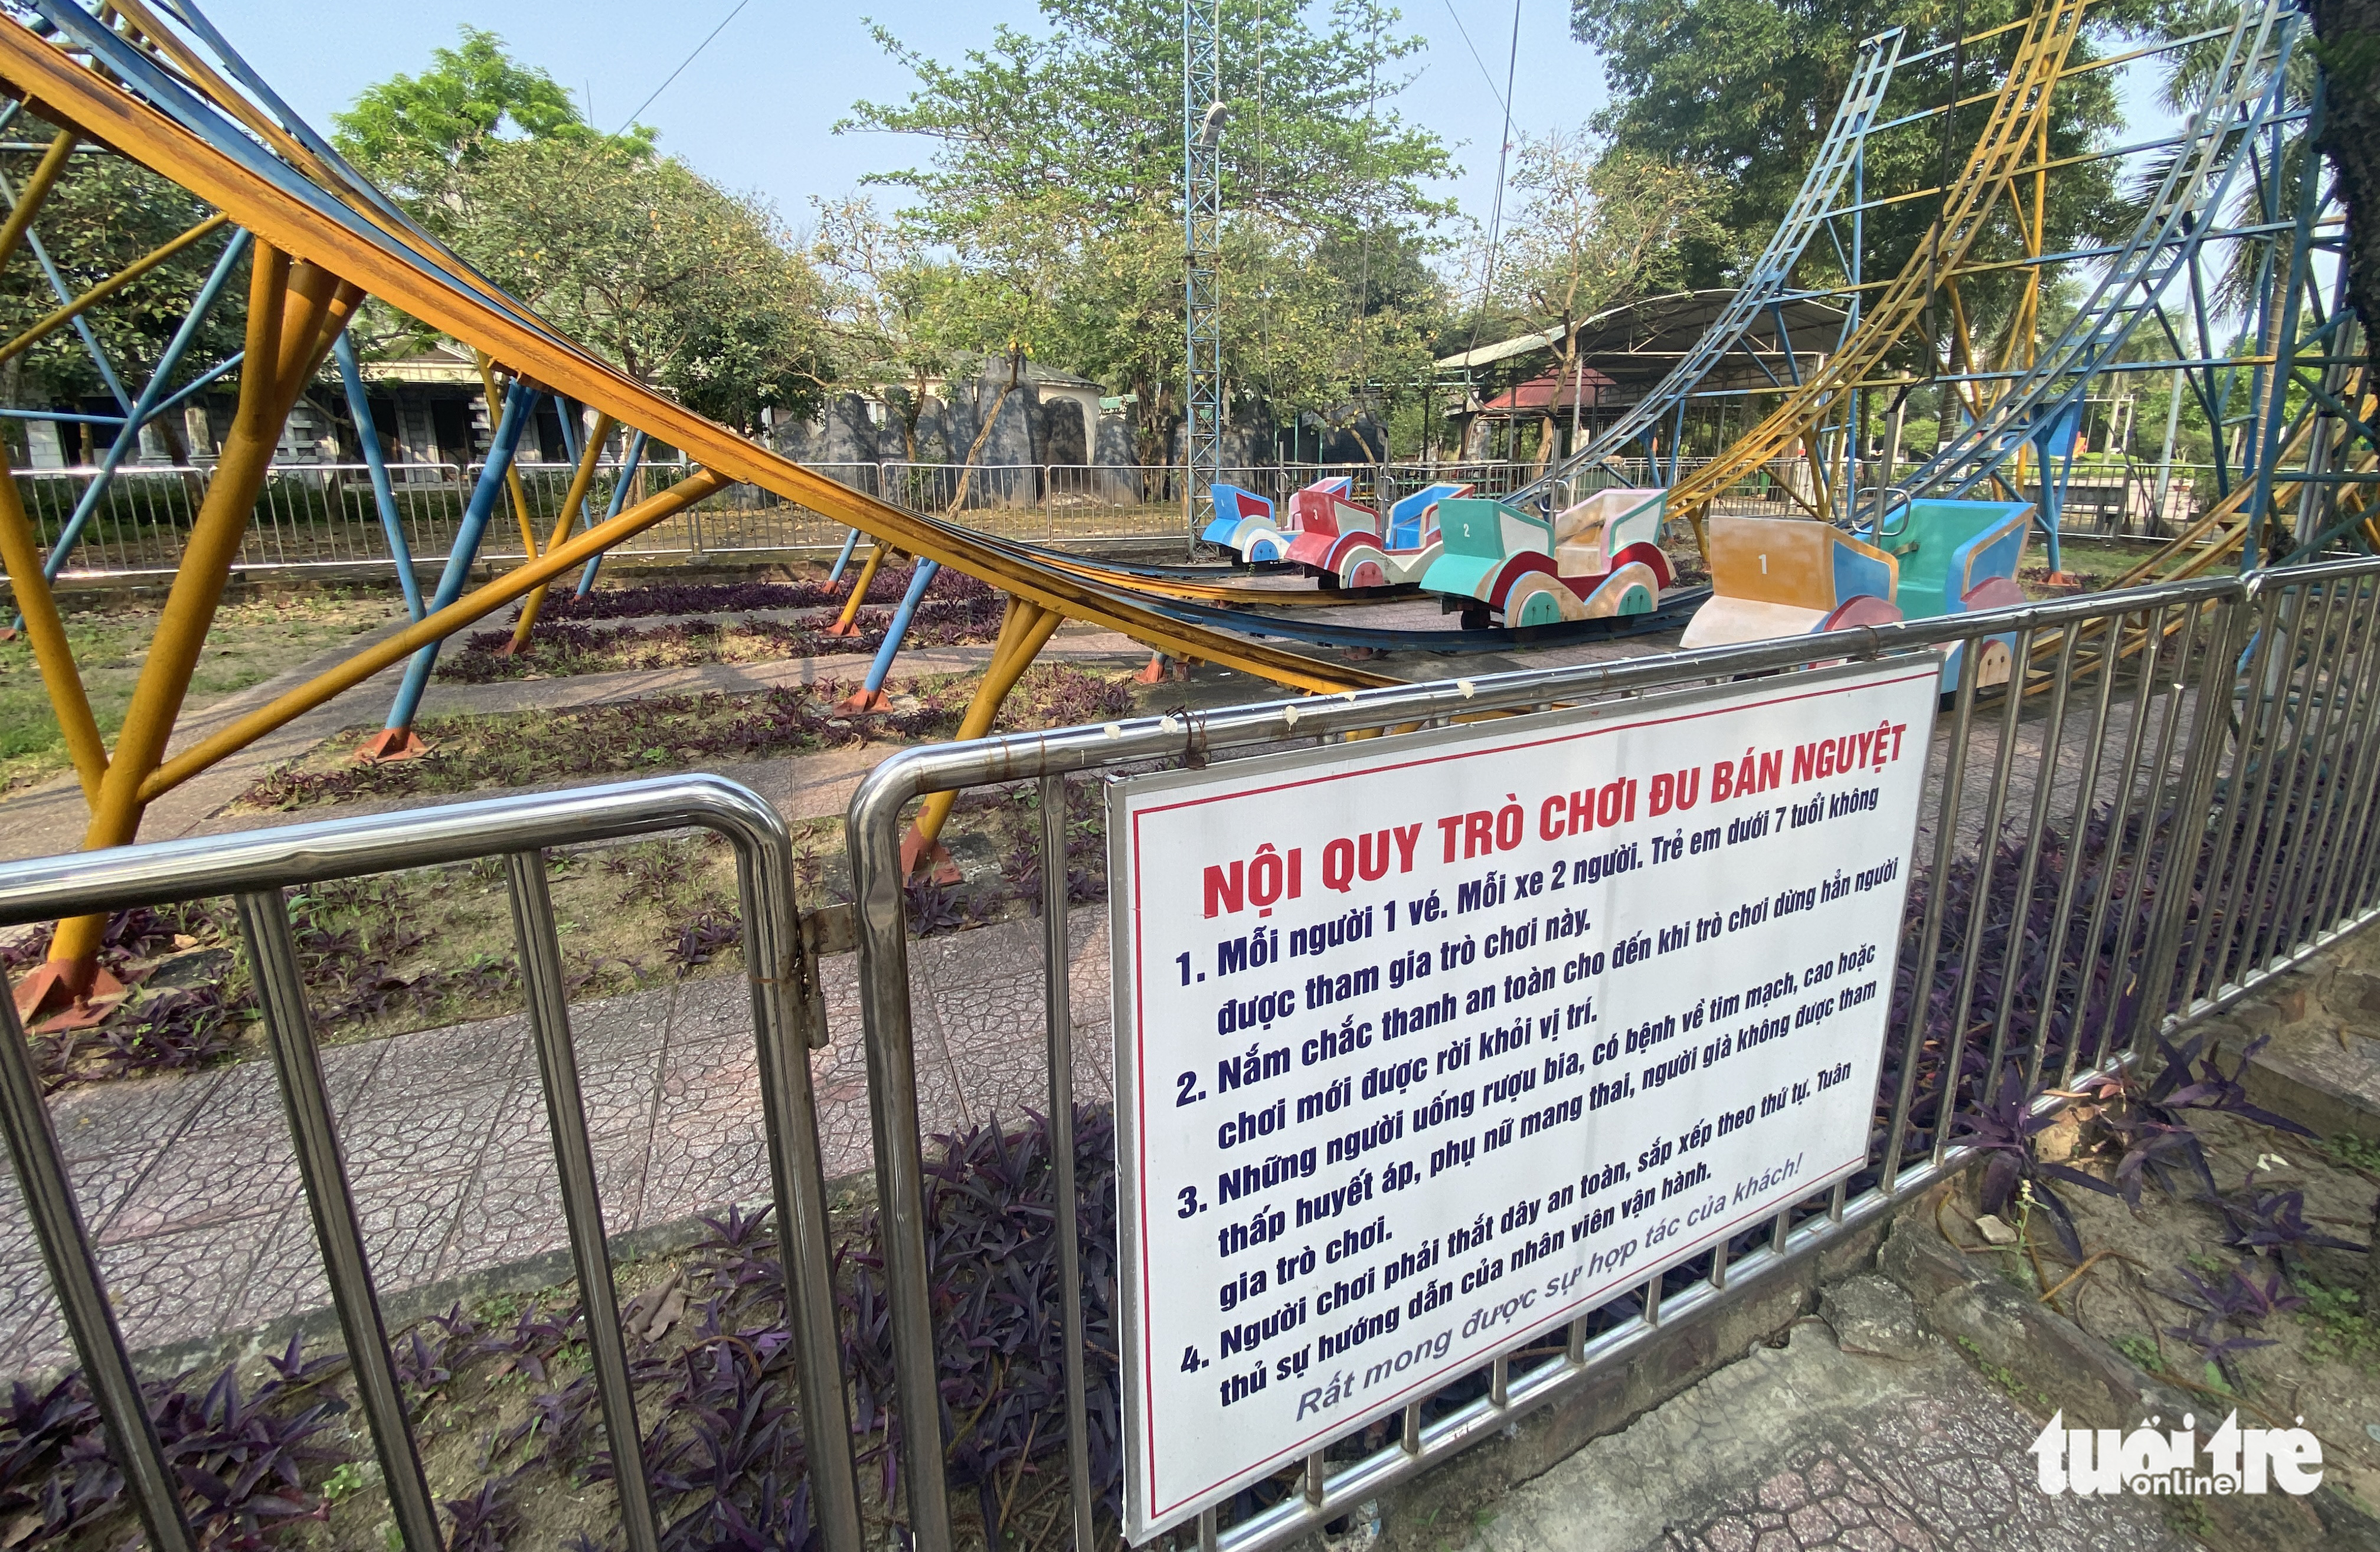 A ride is abandoned at the Vinh City central park in the heart of Vinh City in Nghe An Province, Vietnam. Photo: Doan Hoa / Tuoi Tre